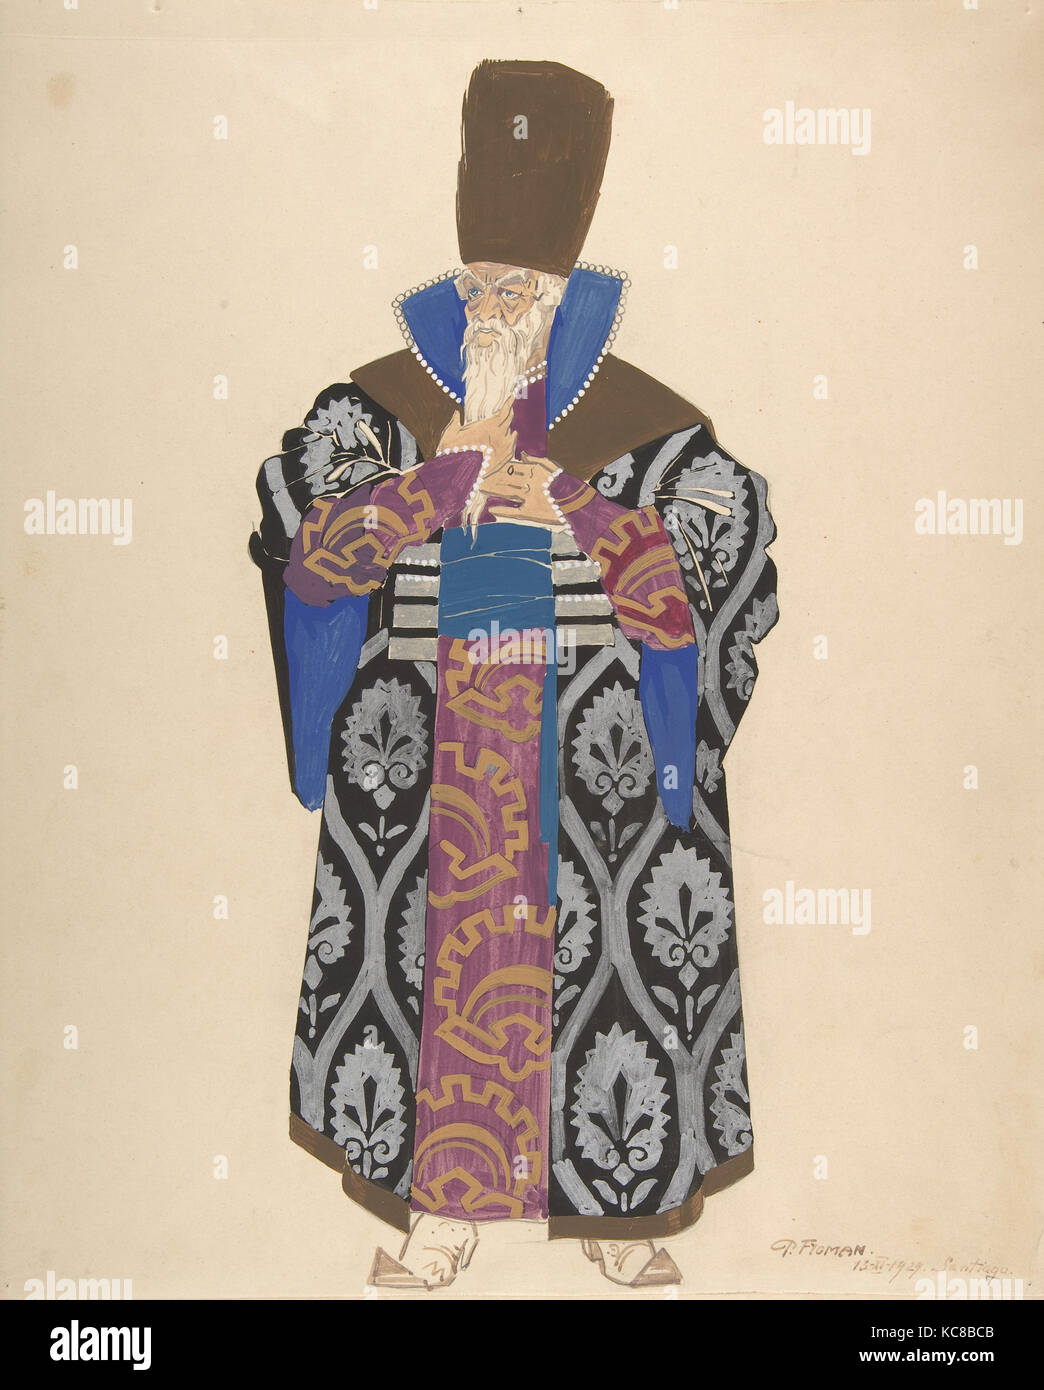 Costume Study for Robed Boyar with White Beard, Pavel Petrovic Froman, 1929 Stock Photo